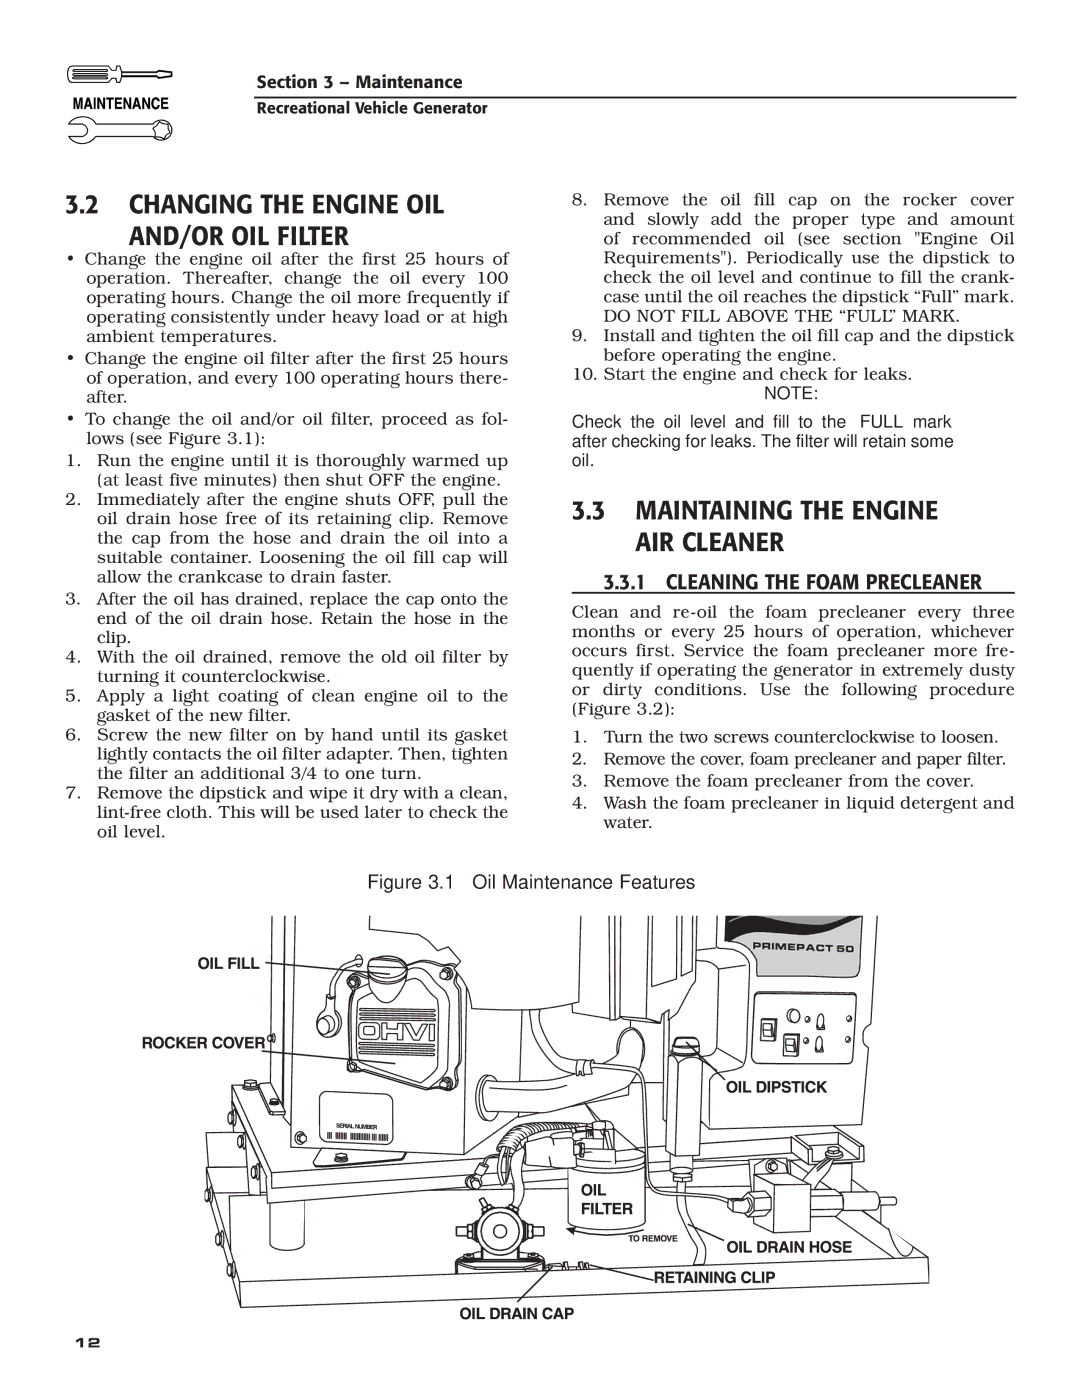 Guardian Technologies 02010-2, 04164-3 Changing the Engine OIL AND/OR OIL Filter, Maintaining the Engine AIR Cleaner 